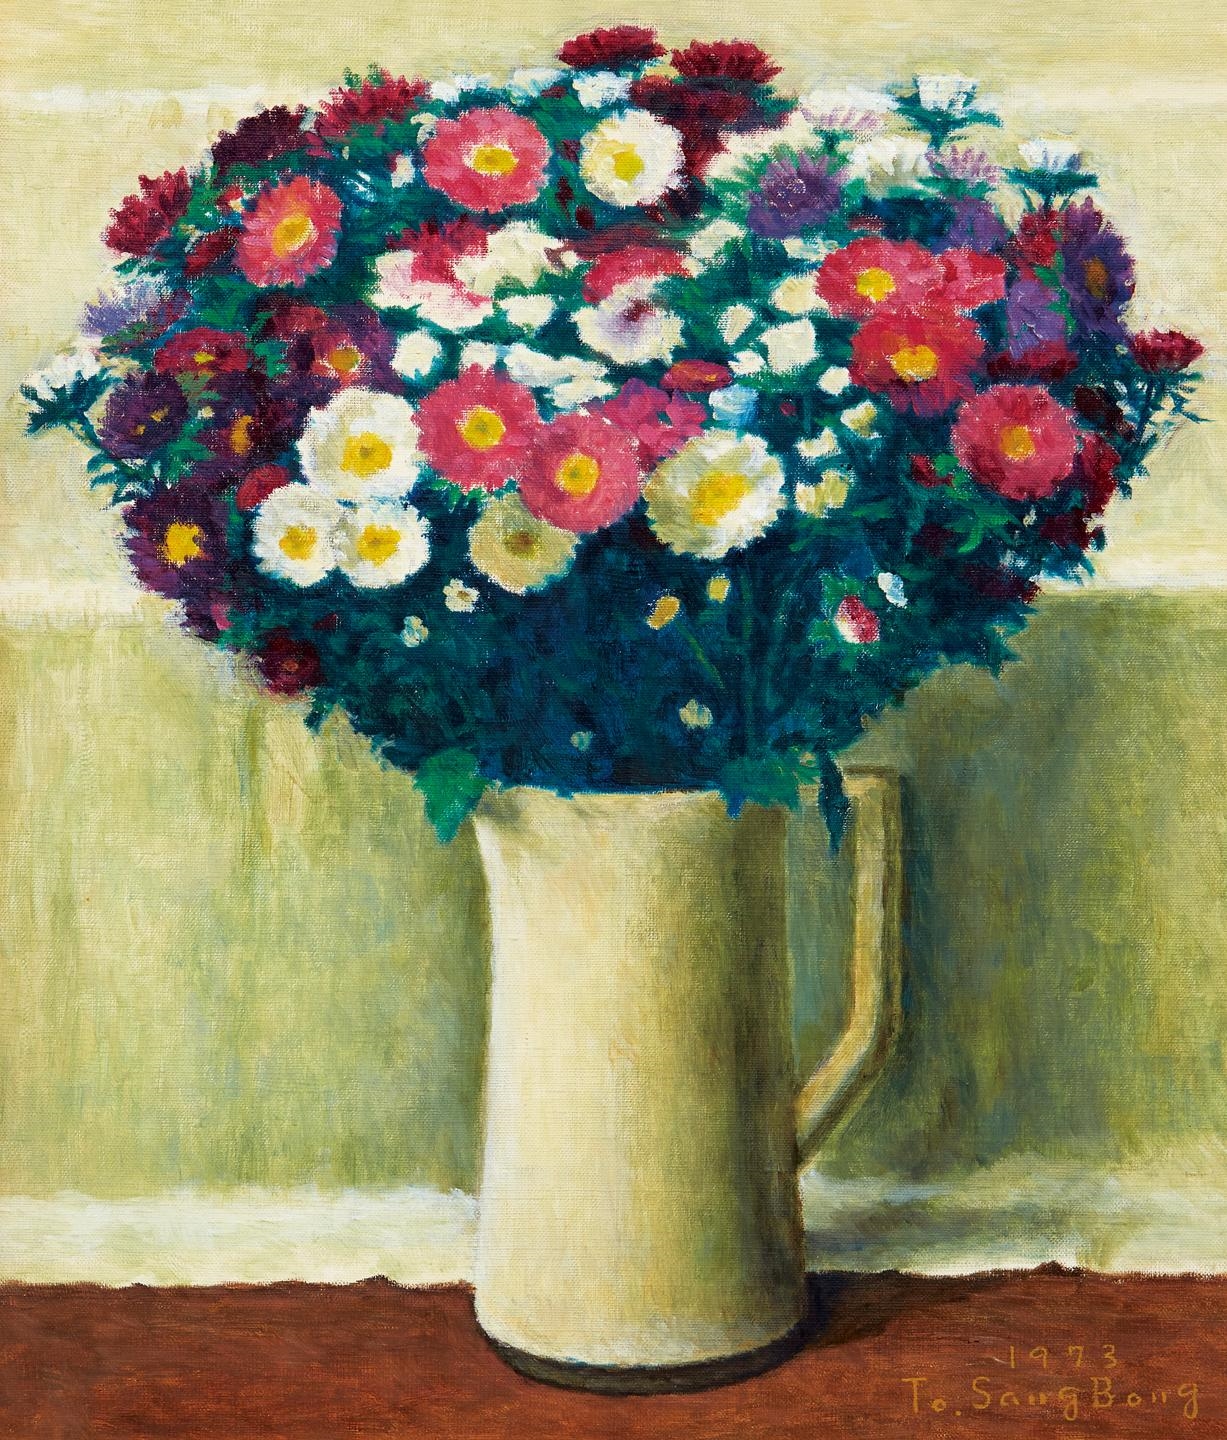 Mums in August by To Sang-Bong, 1973